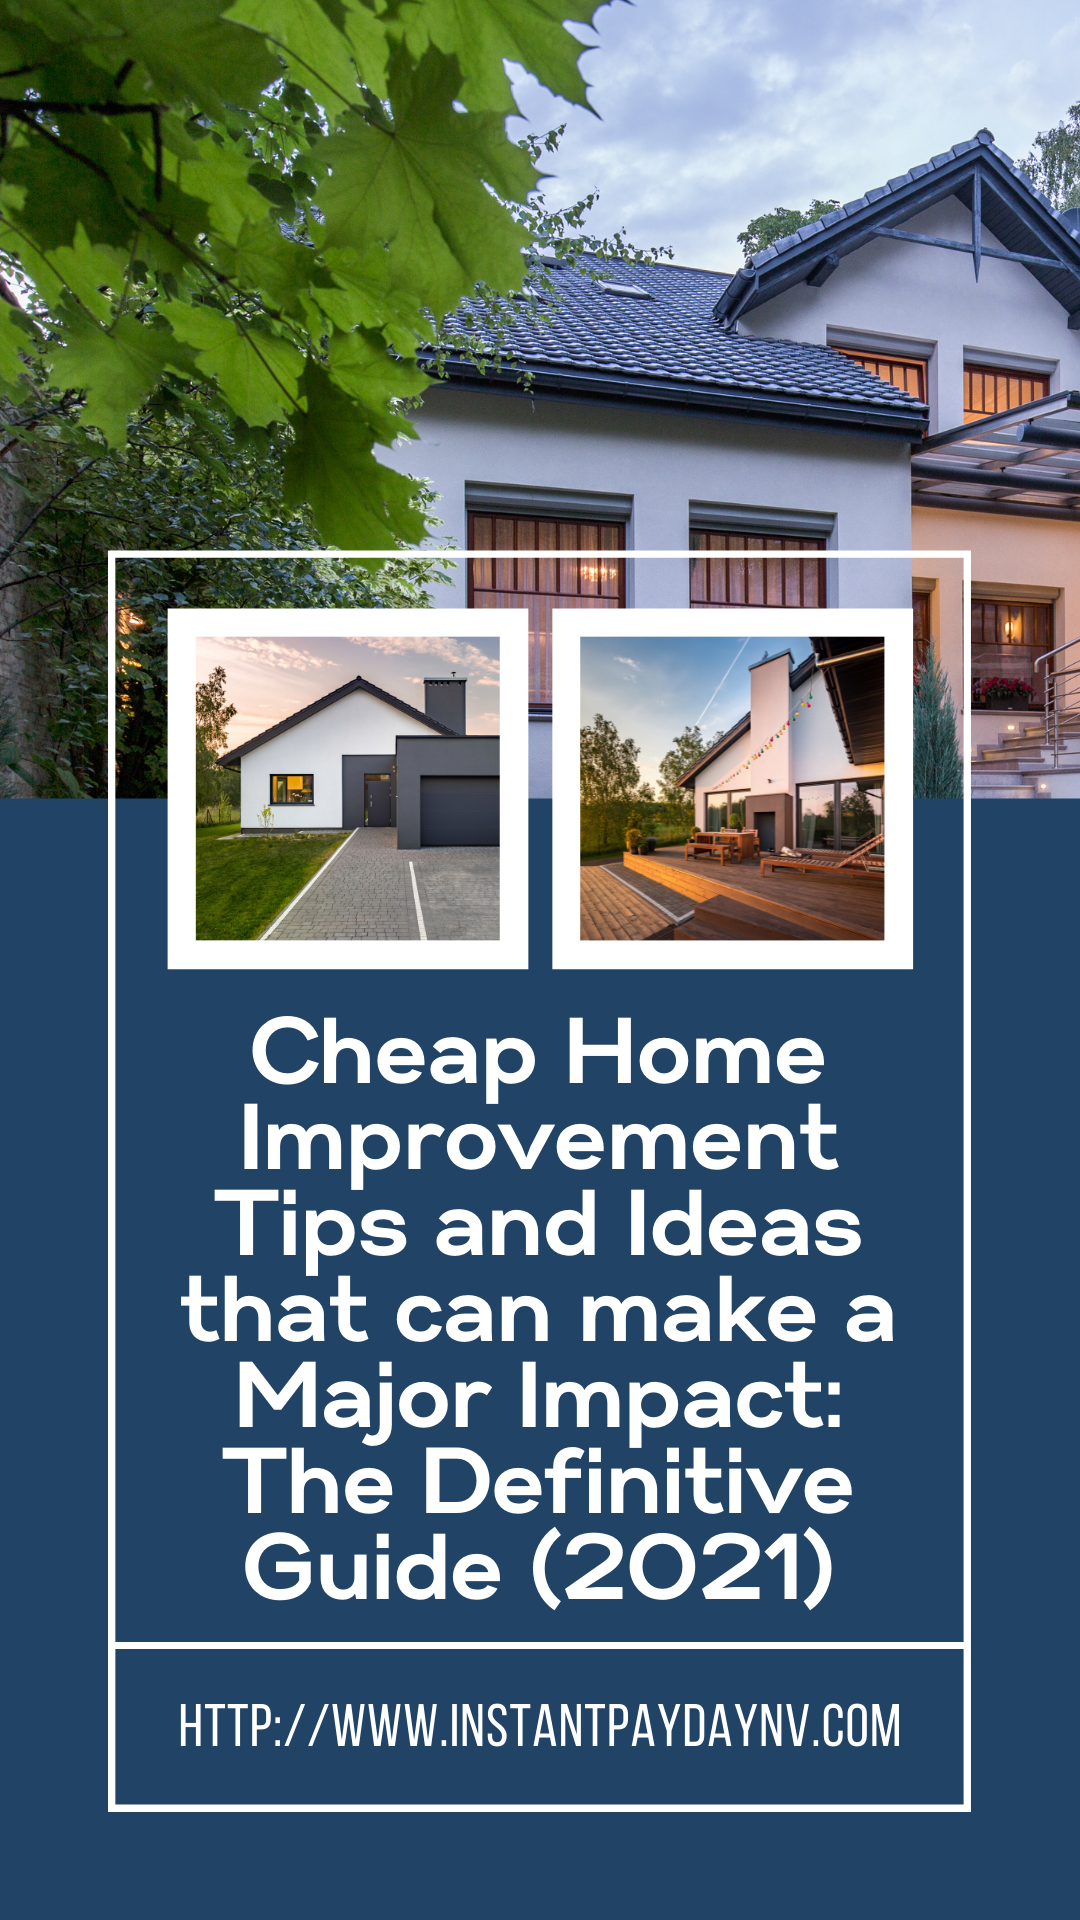 Cheap Home Improvement Tips and Ideas that can make a Major Impact: The Definitive Guide (2021)